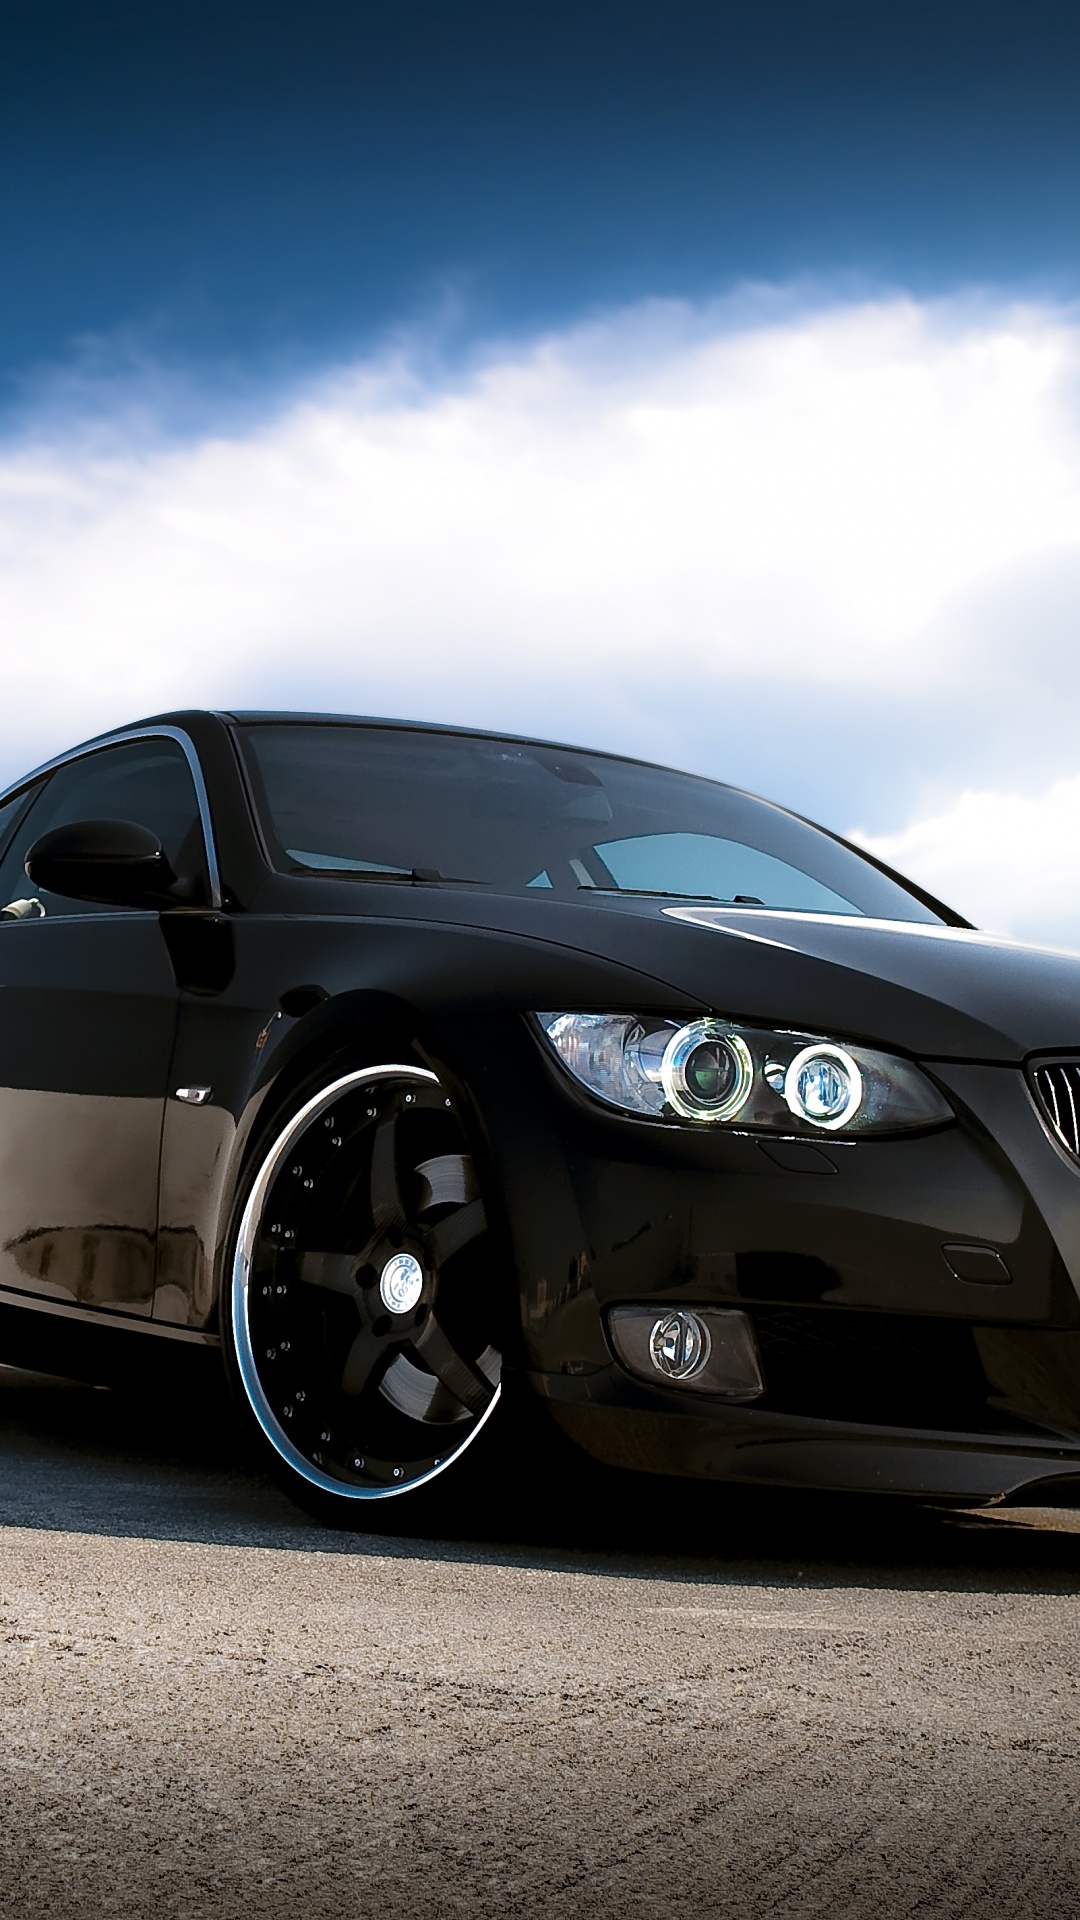 Black Bmw m 3 Coupe. Wallpaper in 1080x1920 Resolution